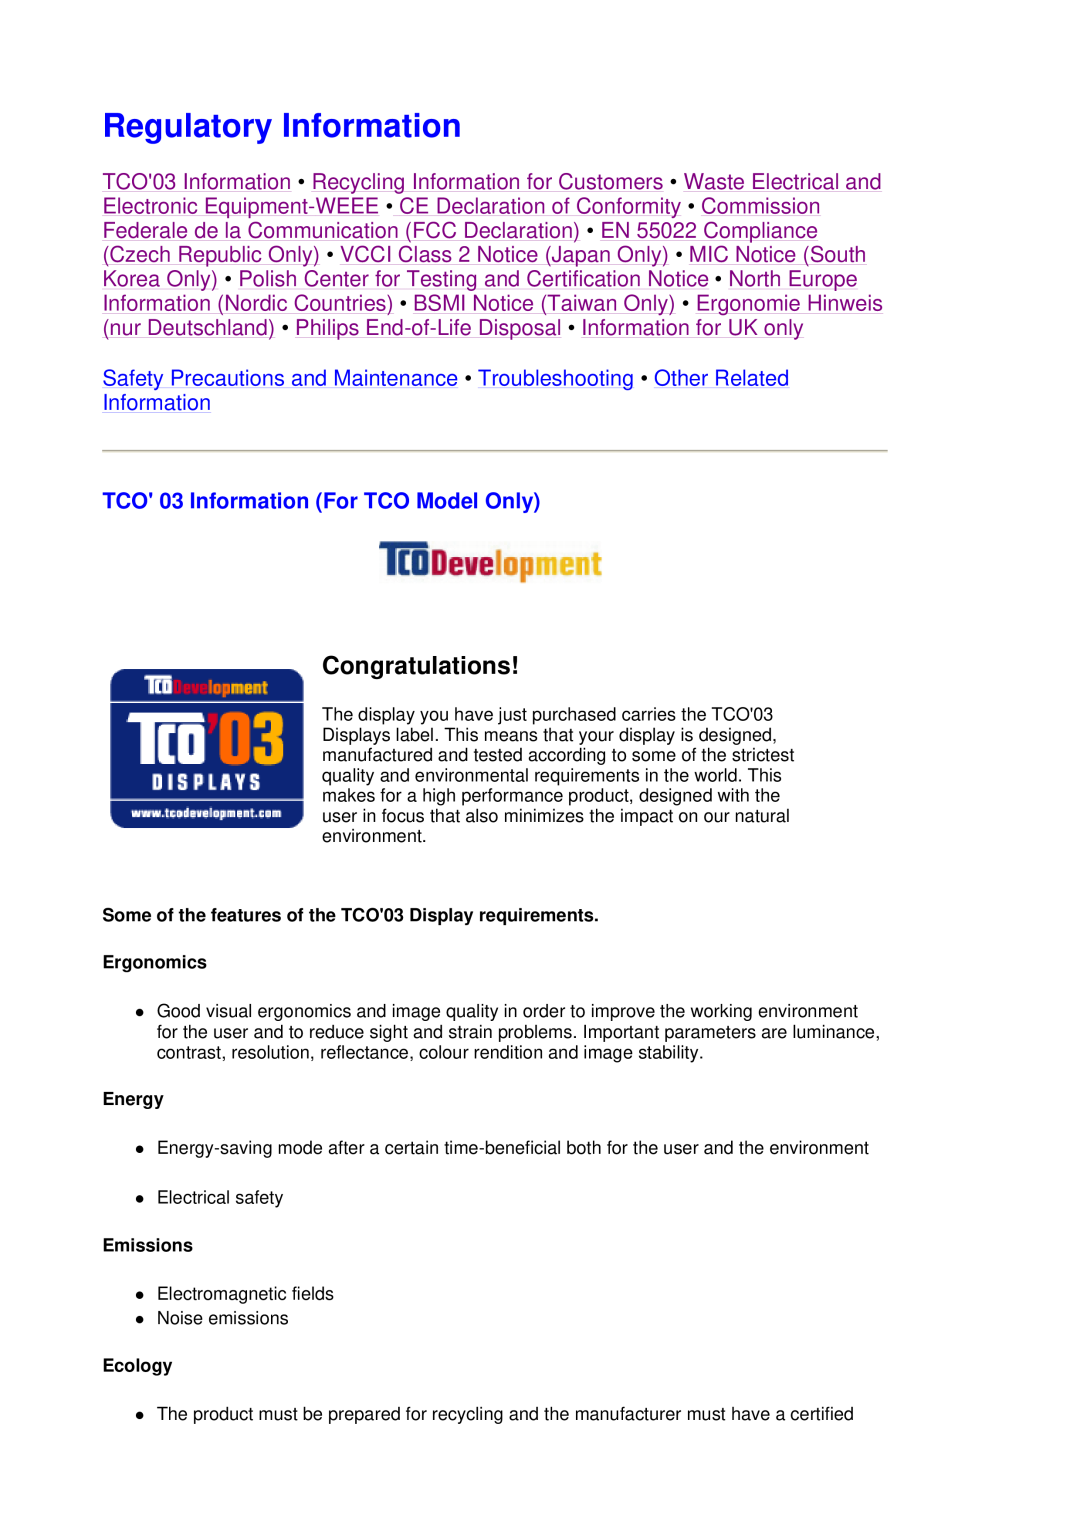 Philips 109B7, 109F7 manual Regulatory Information, Congratulations, TCO 03 Information For TCO Model Only 